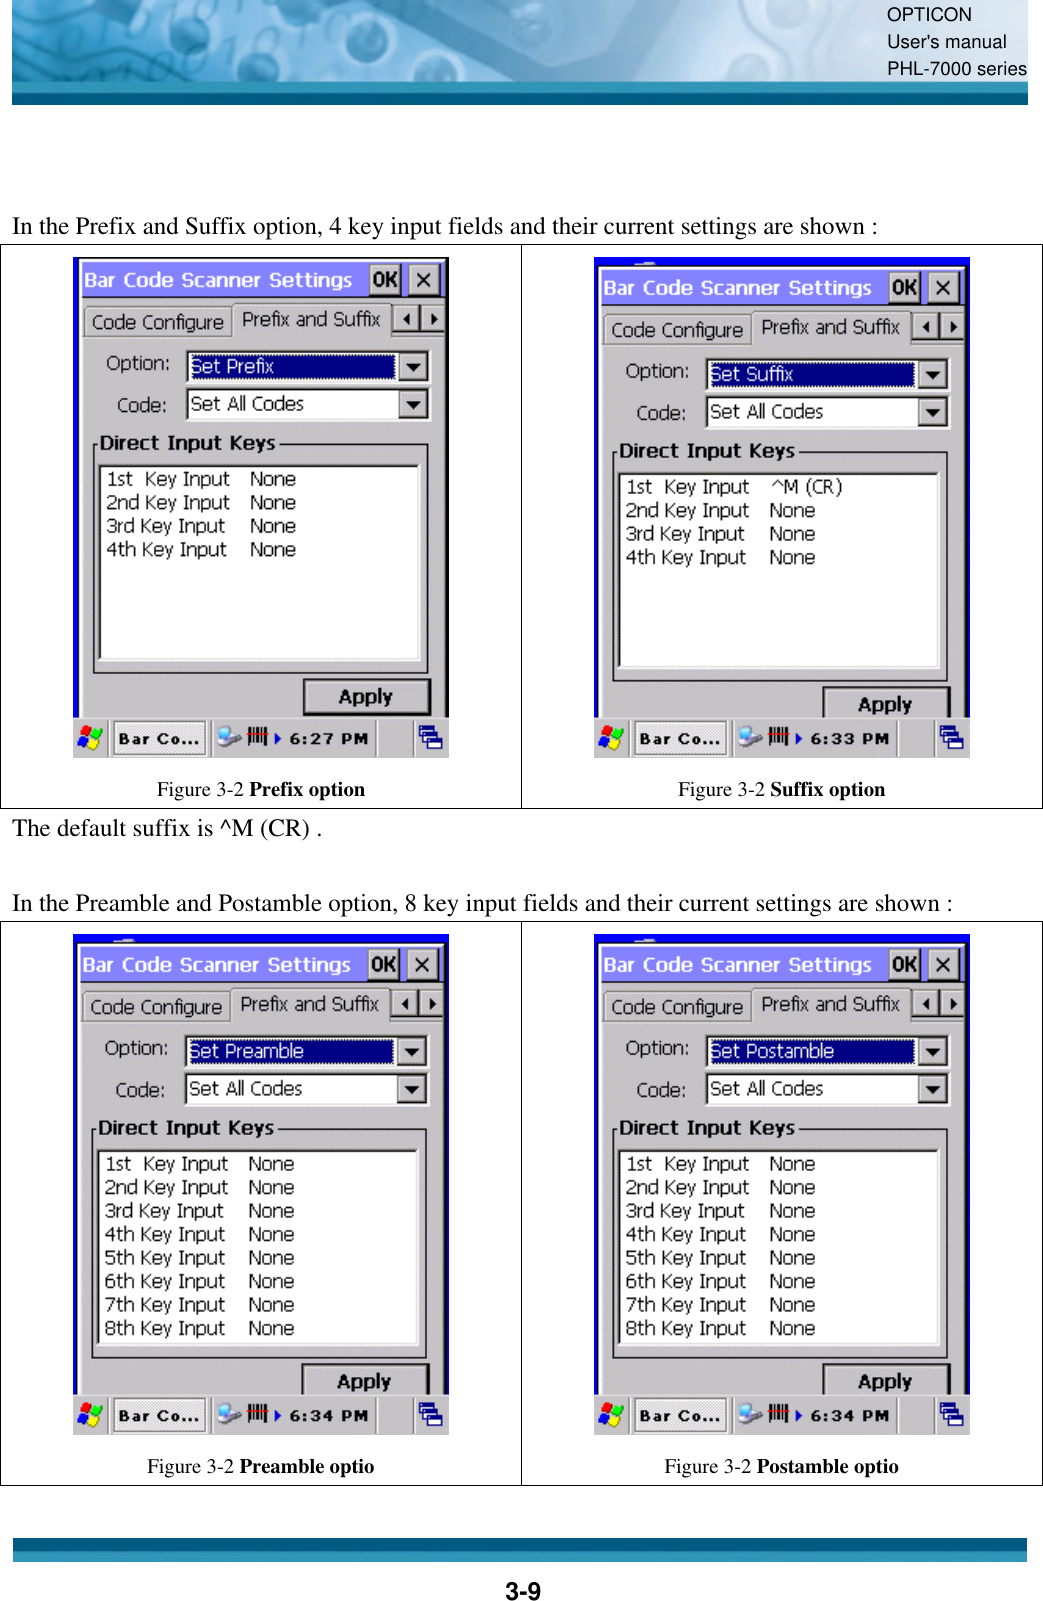 OPTICON User&apos;s manual PHL-7000 series    3-9   In the Prefix and Suffix option, 4 key input fields and their current settings are shown :  Figure 3-2 Prefix option  Figure 3-2 Suffix option The default suffix is ^M (CR) .  In the Preamble and Postamble option, 8 key input fields and their current settings are shown :  Figure 3-2 Preamble optio  Figure 3-2 Postamble optio  